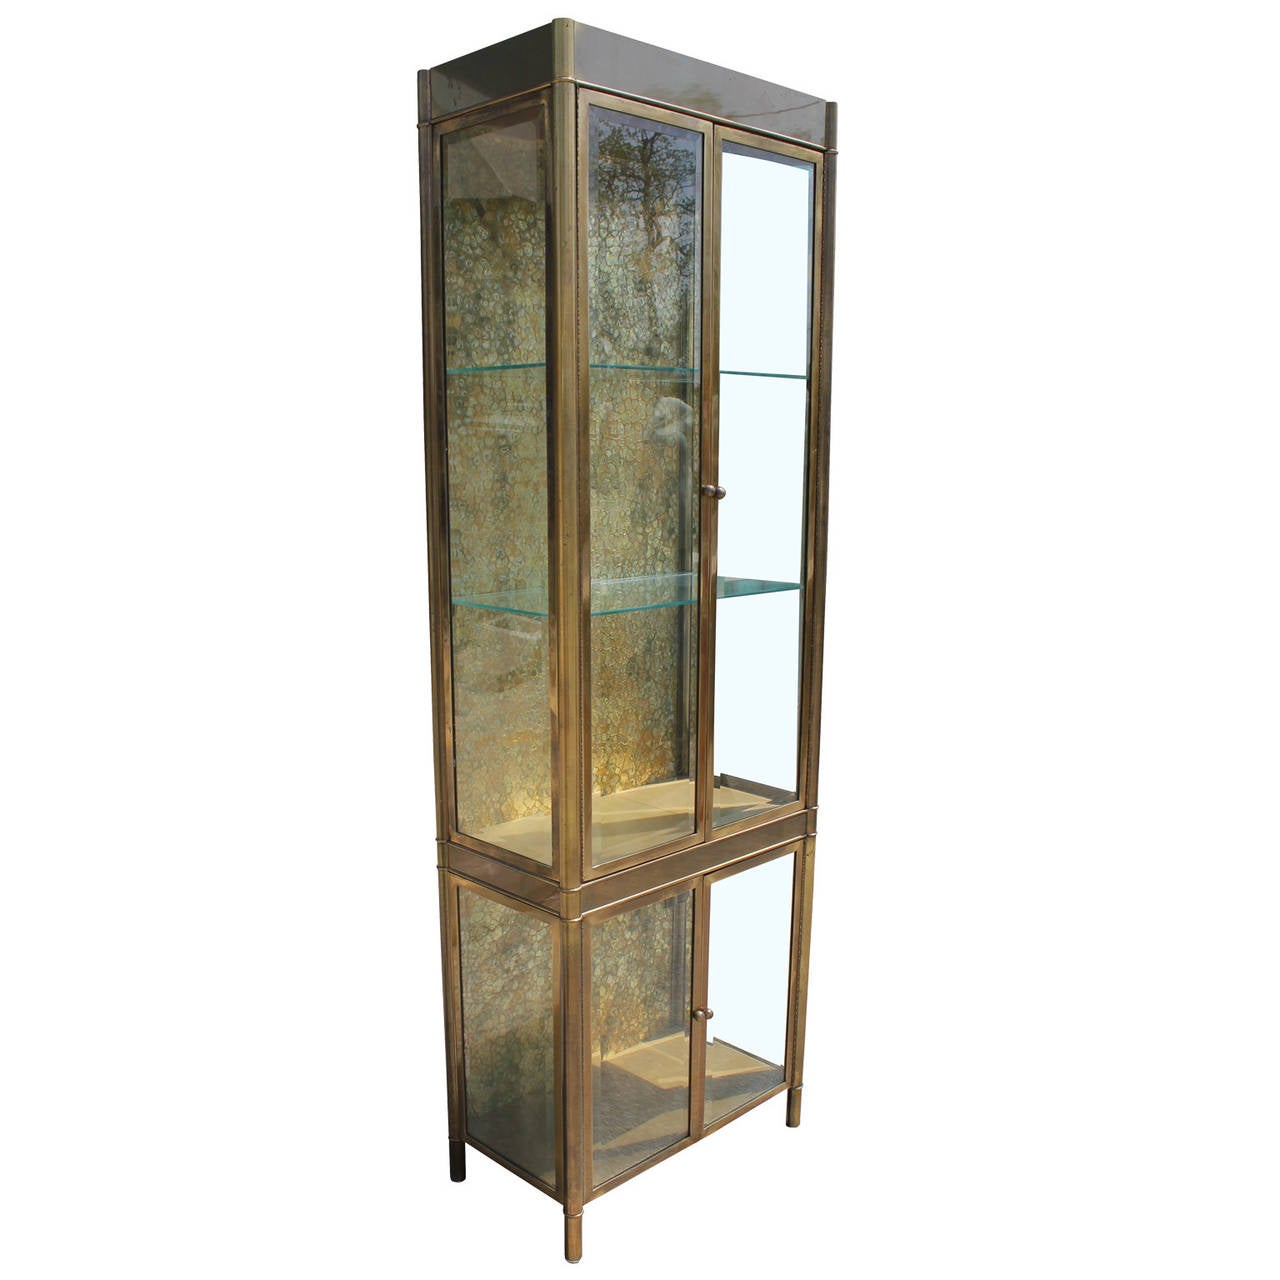 Pair of stunning four door Mastercraft brass and glass Displays. Vitrines feature interior lighting and two glass shelves in the upper portion. A textured brass back adds visual interest.